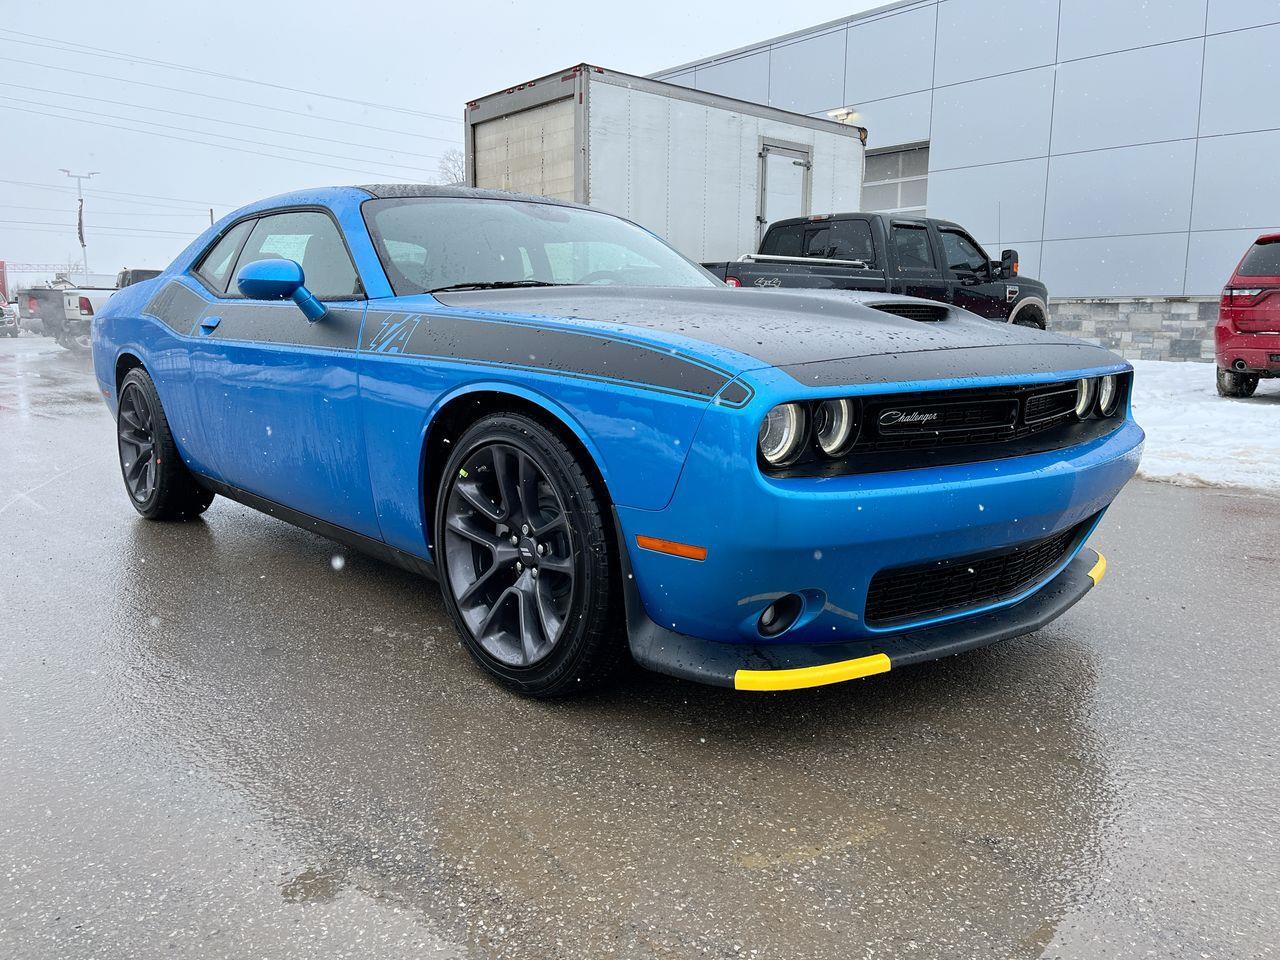 2023 Dodge Challenger R/T HEATED SEATS| POWER DRIVER'S SEAT | LEATHER HE